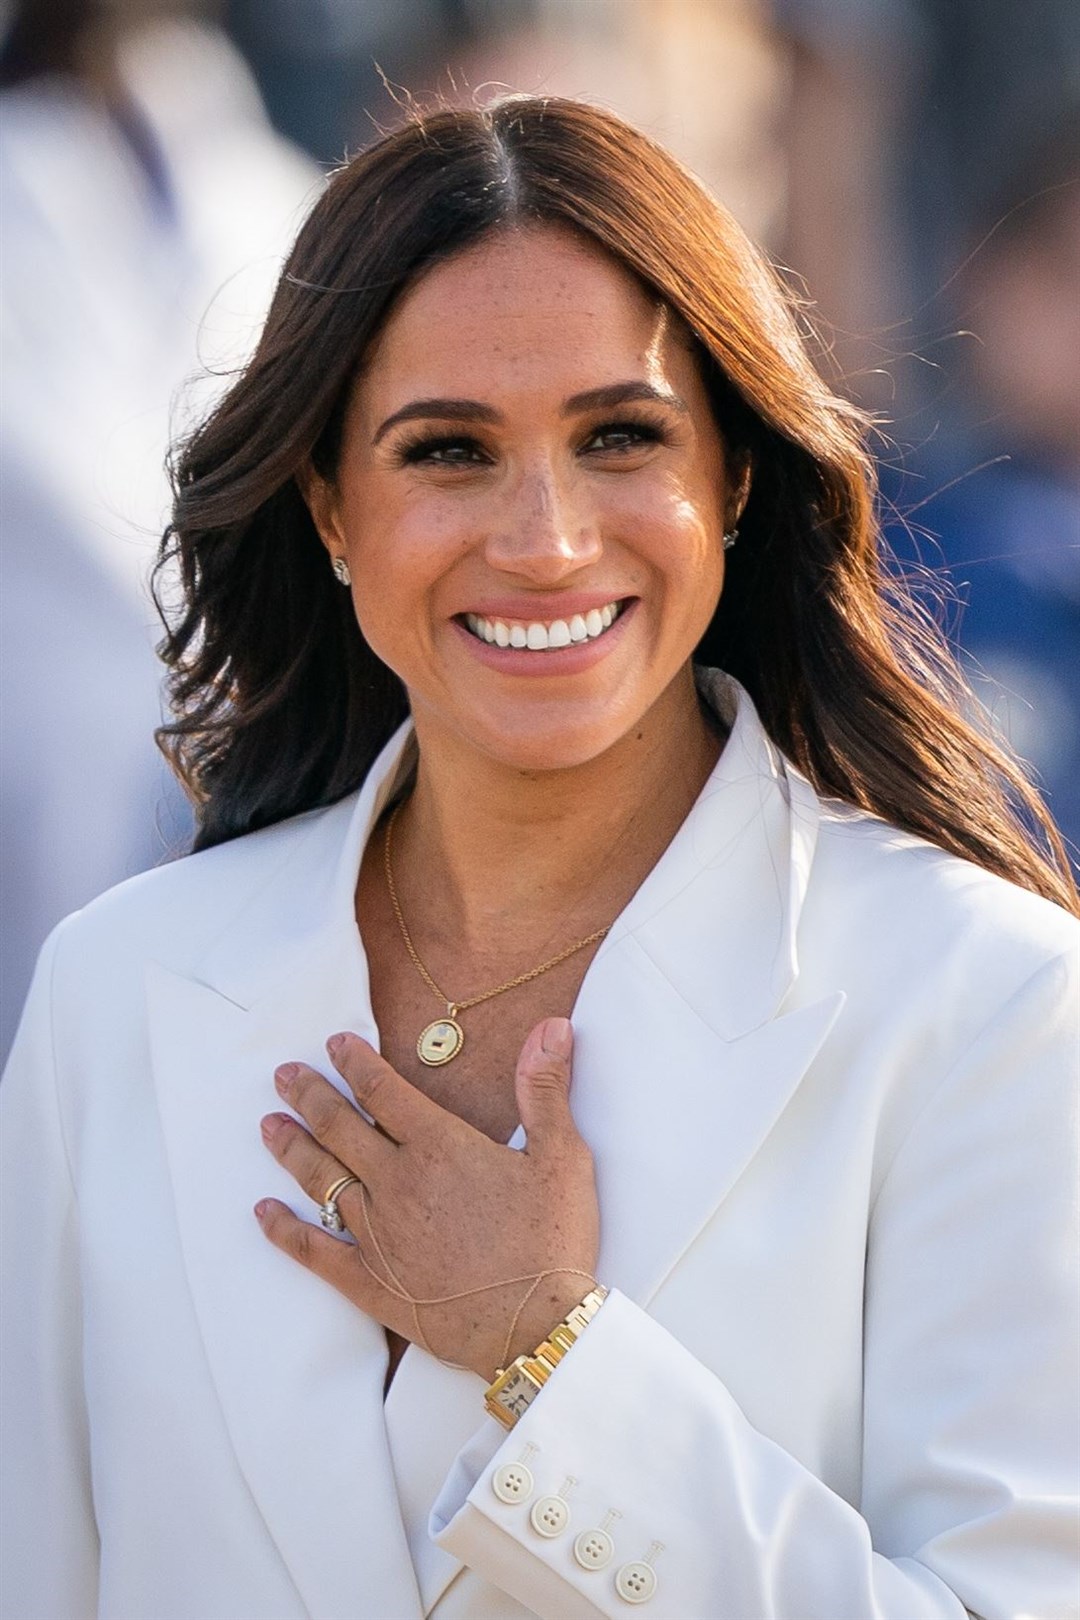 Meghan’s motion to block their depositions in the case, filed by Samantha Markle, was denied by a judge on Tuesday (Aaron Chown/PA)